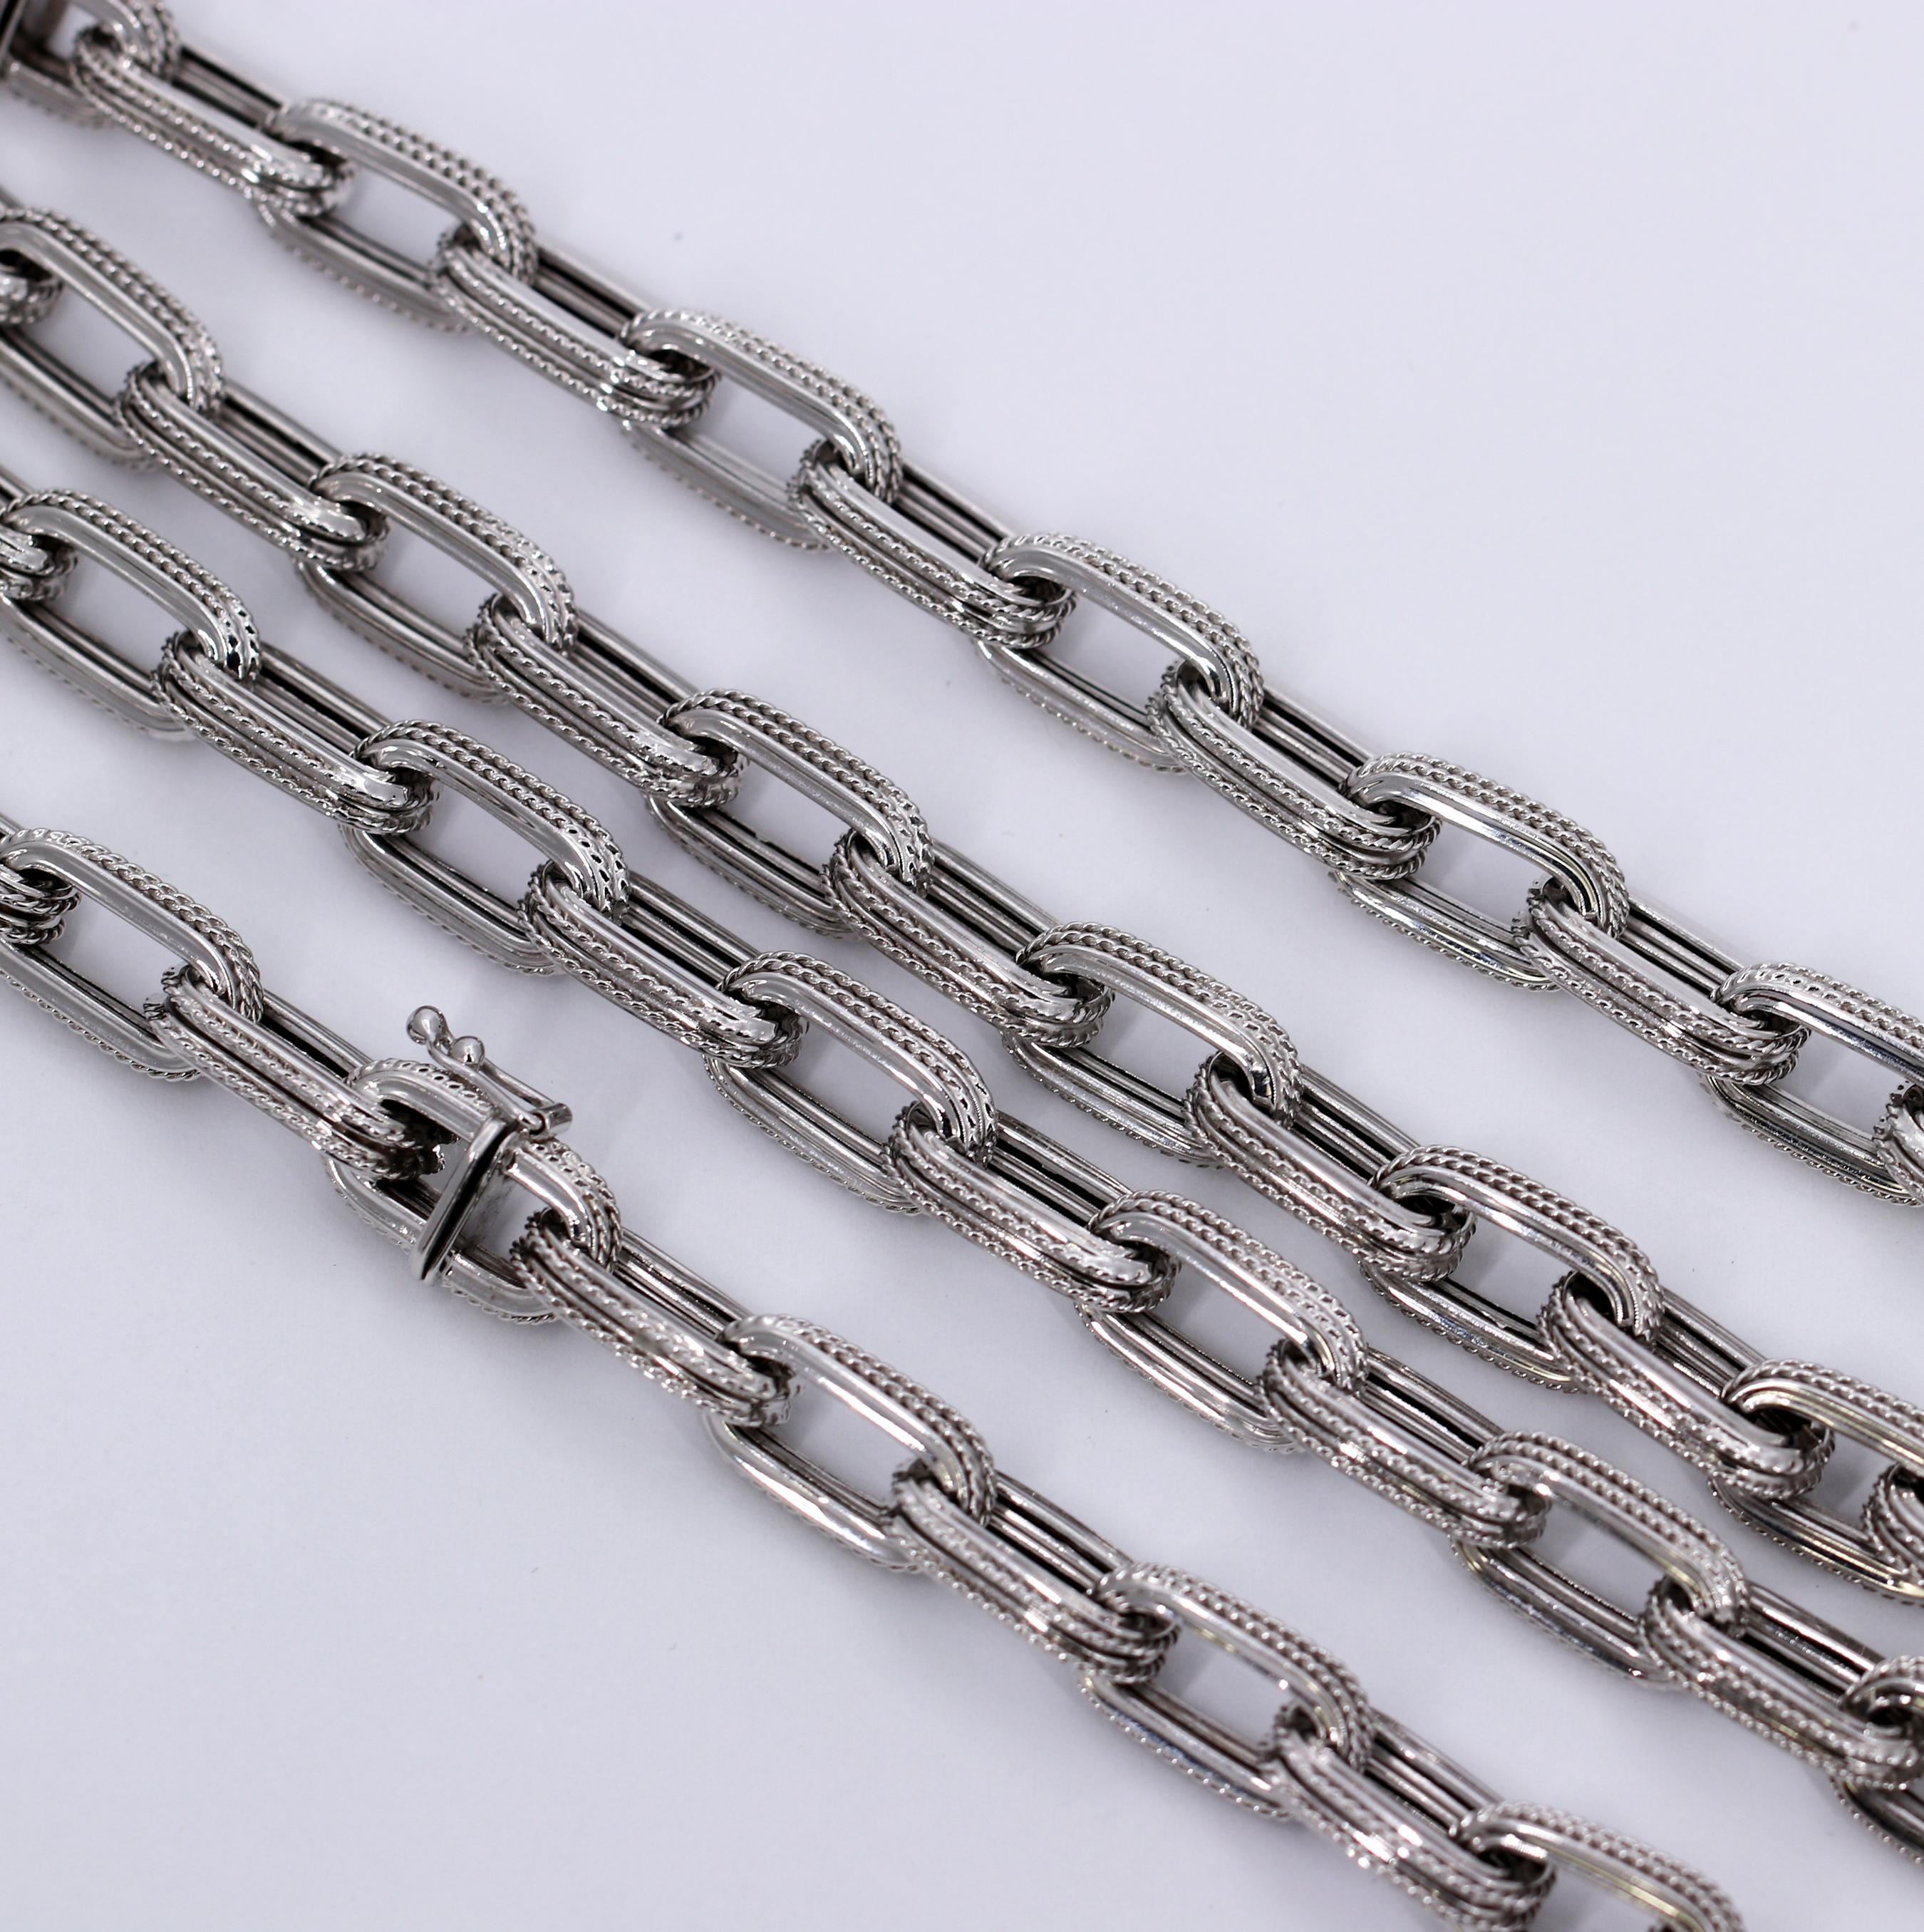 A 44.5 inch long chain made by OTC, in 18K white gold, with a twisted rope edge. Able to be broken into three sections:  two sections measure 18 1/2 inches each, and the
third section measure 7.5 inches (can be worn as a bracelet). Marked 18KT OTC